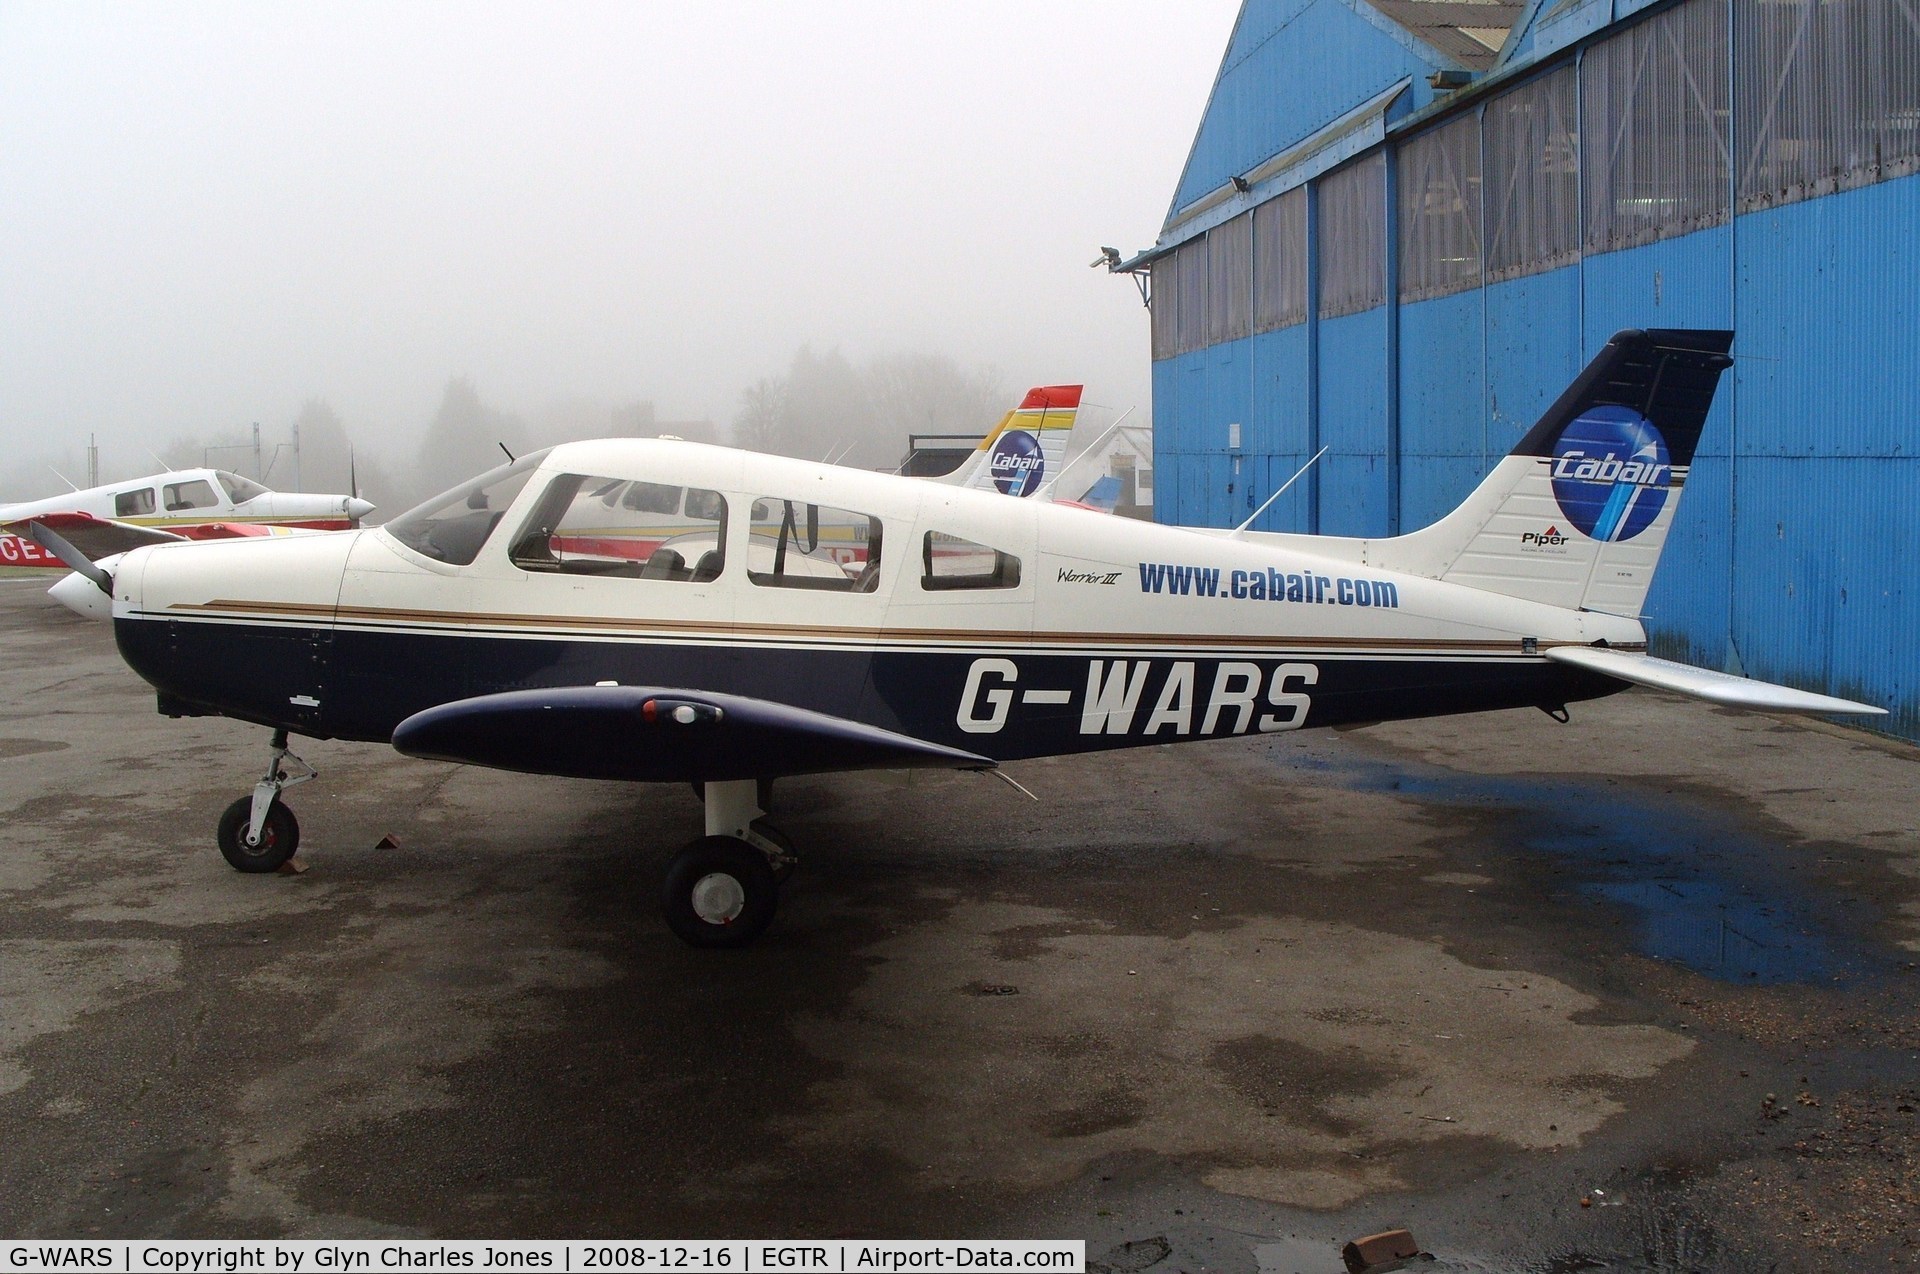 G-WARS, 1997 Piper PA-28-161 Cherokee Warrior III C/N 2842022, Taken on a quiet cold and foggy day. With thanks to Elstree control tower who granted me authority to take photographs on the aerodrome. Previously N9281X. Operated by Cabair.